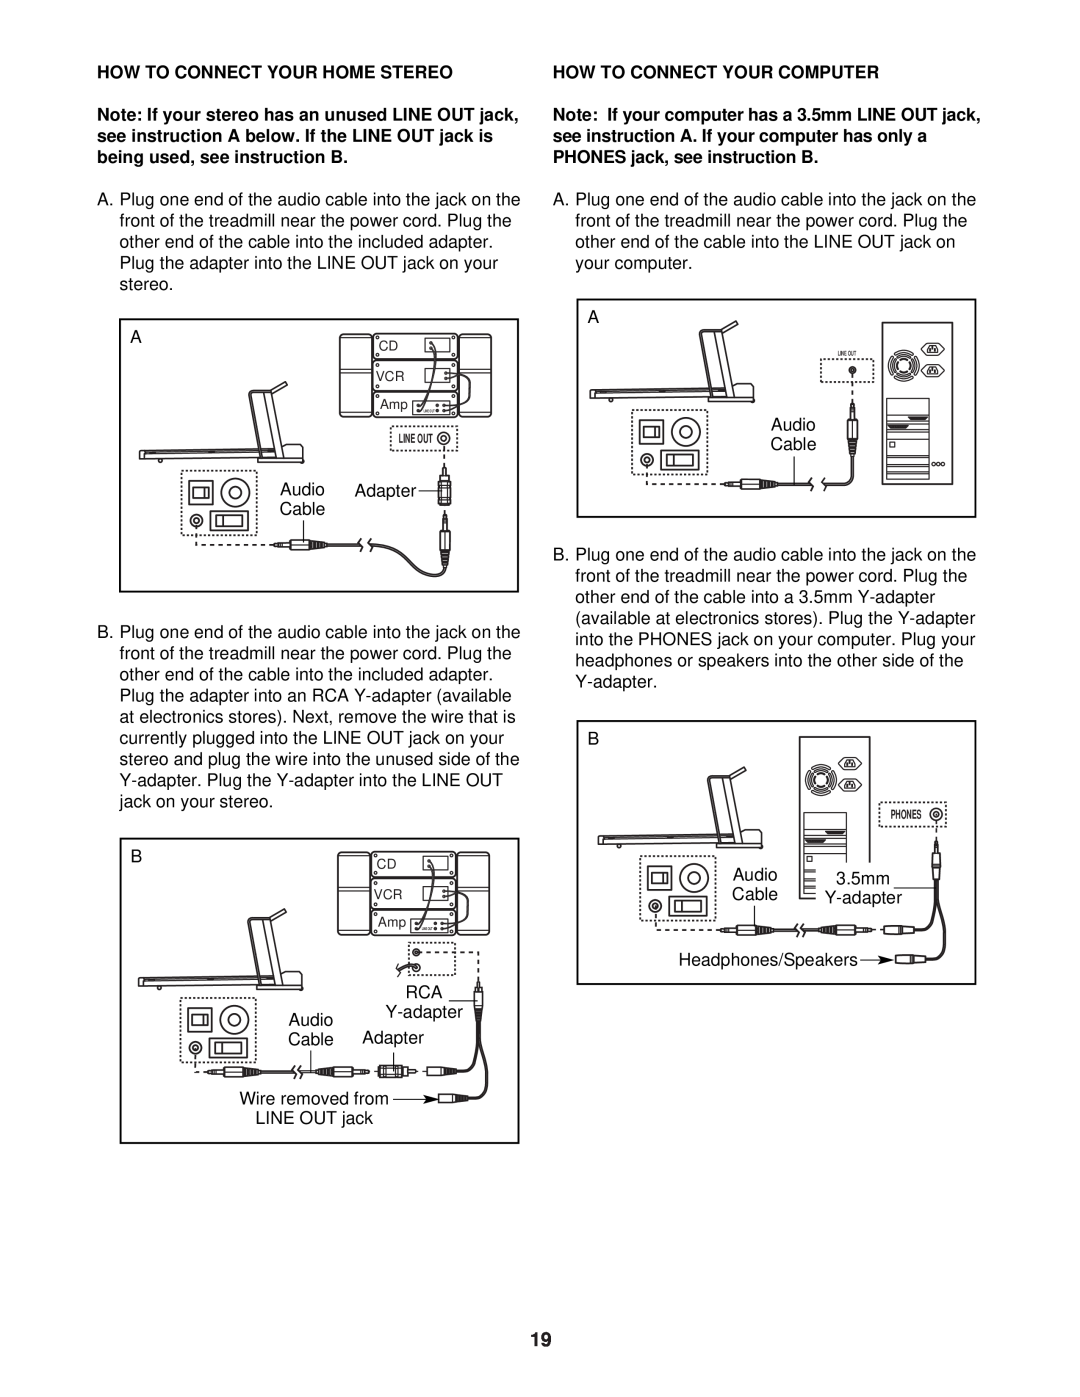 ProForm DTL72940 user manual How To Connect Your Home Stereo, How To Connect Your Computer, Amp LINE OUT, Line Out 